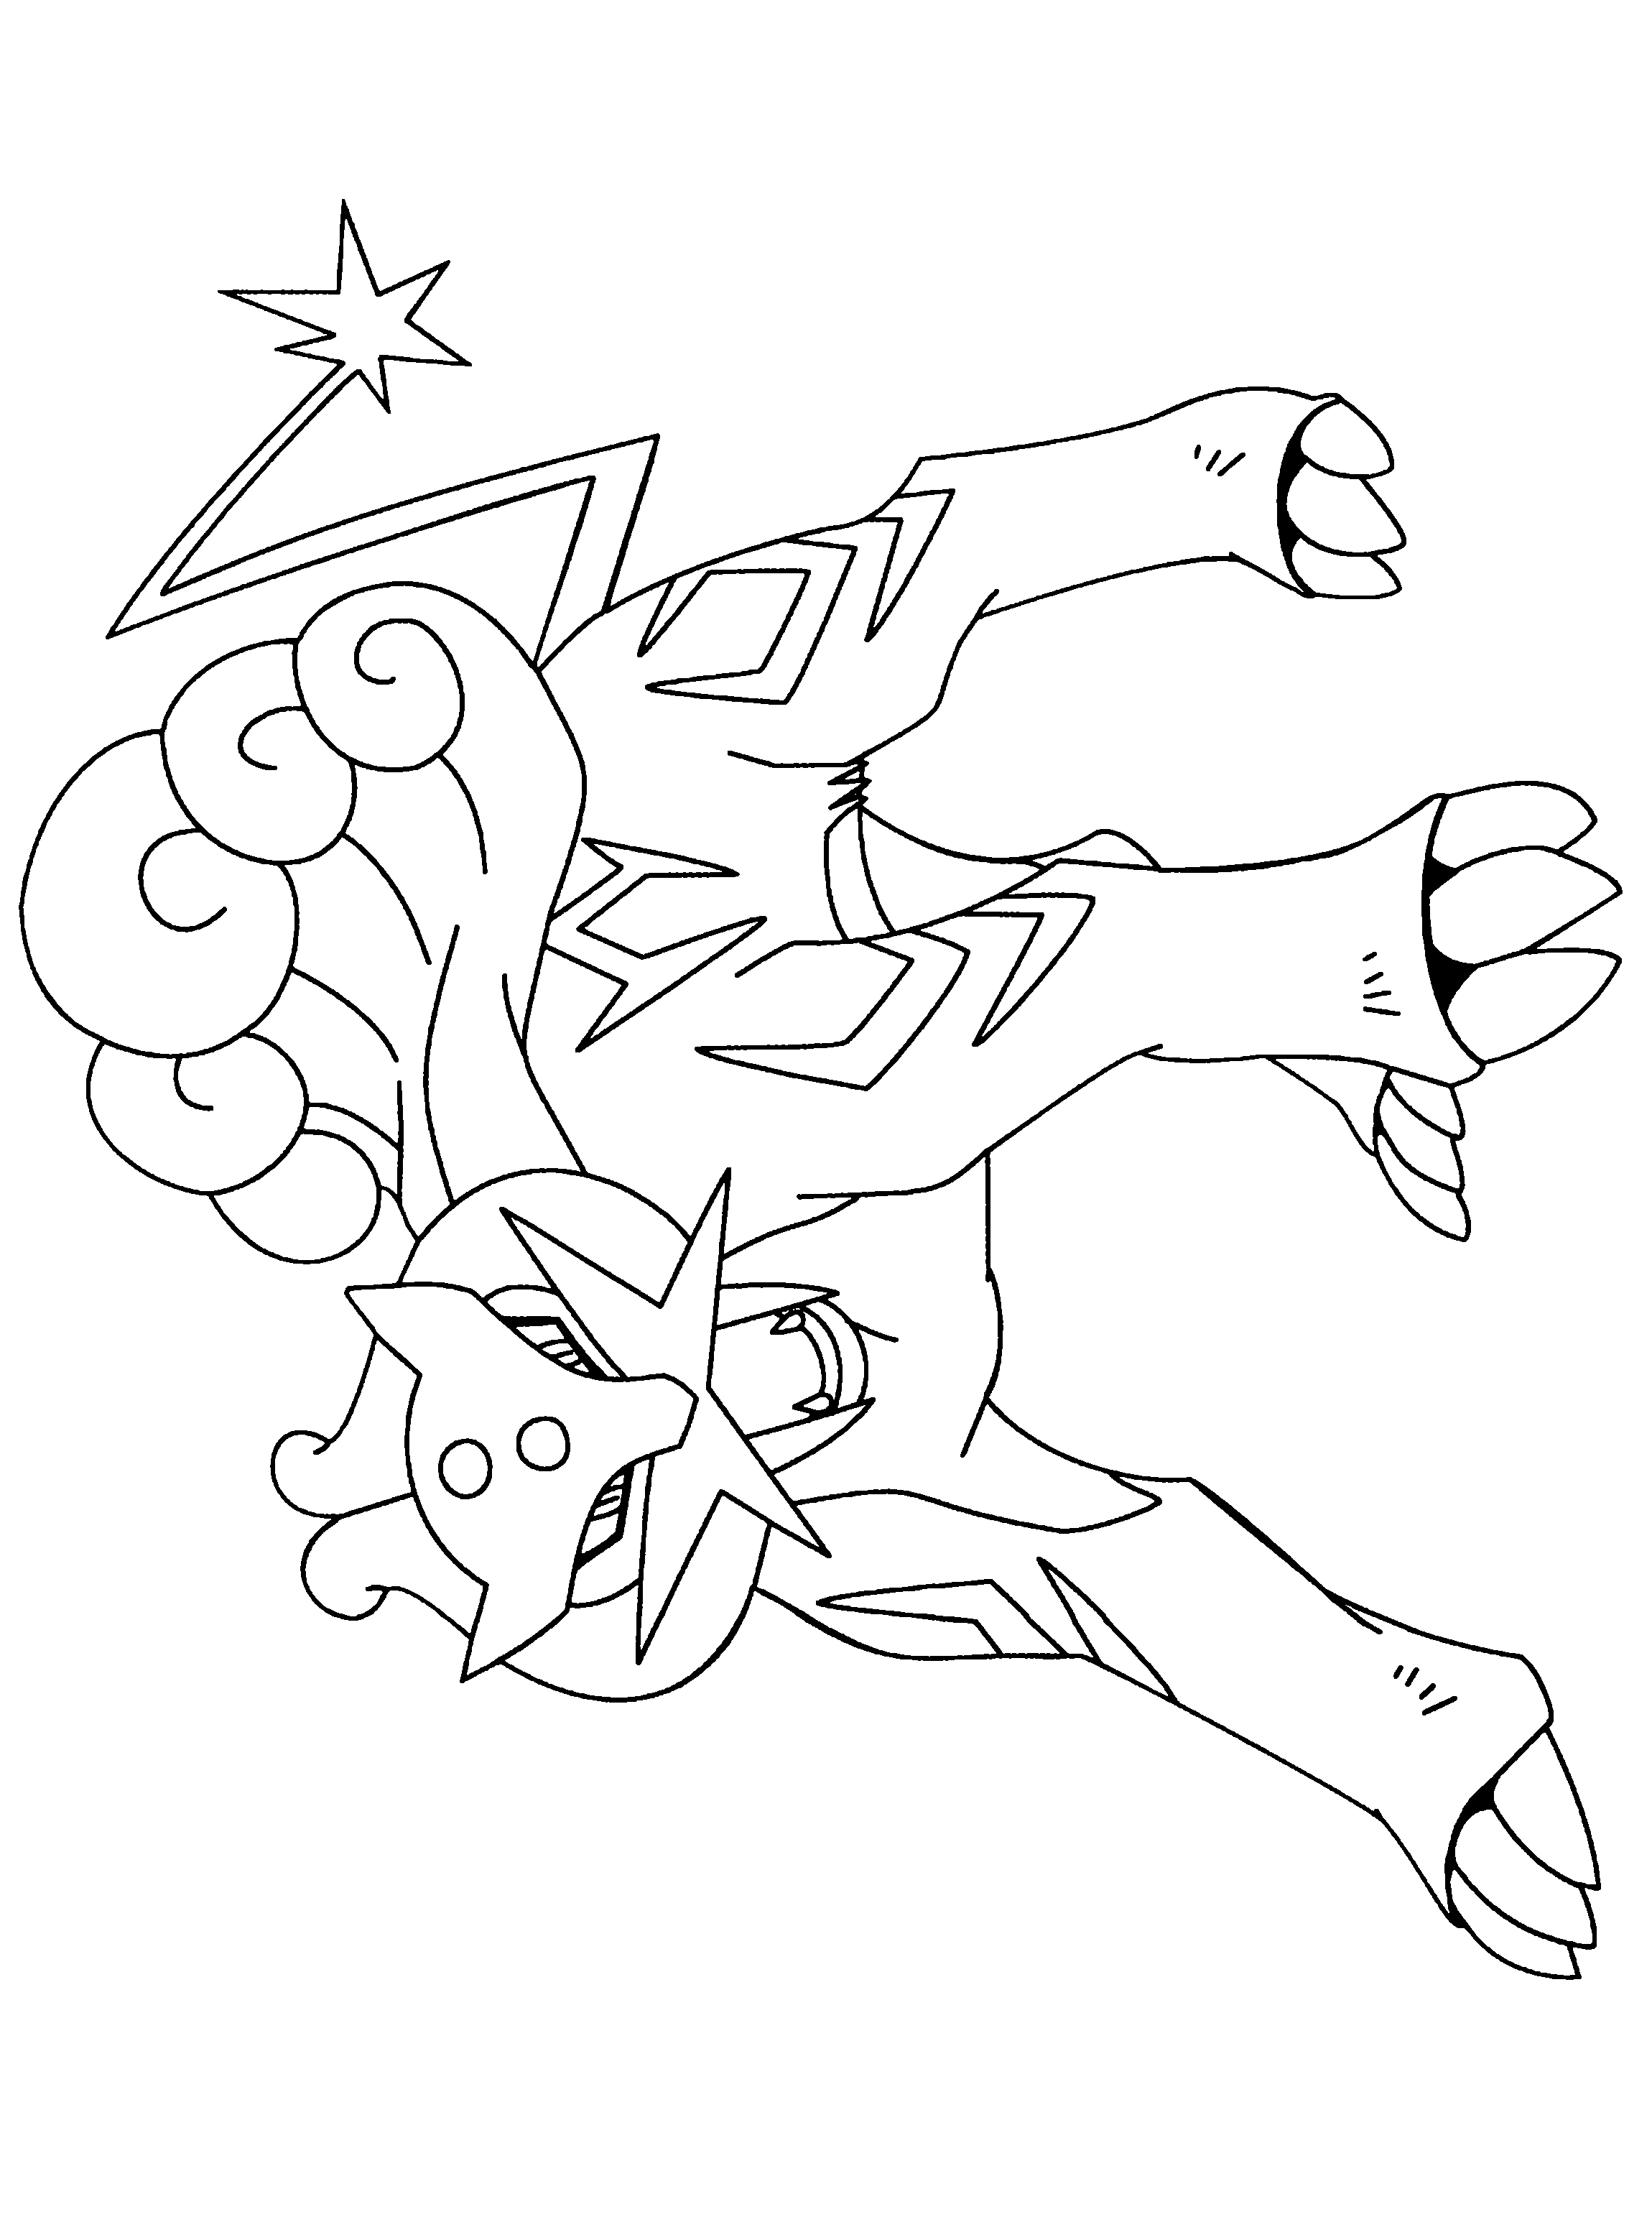 animated-coloring-pages-pokemon-image-0217